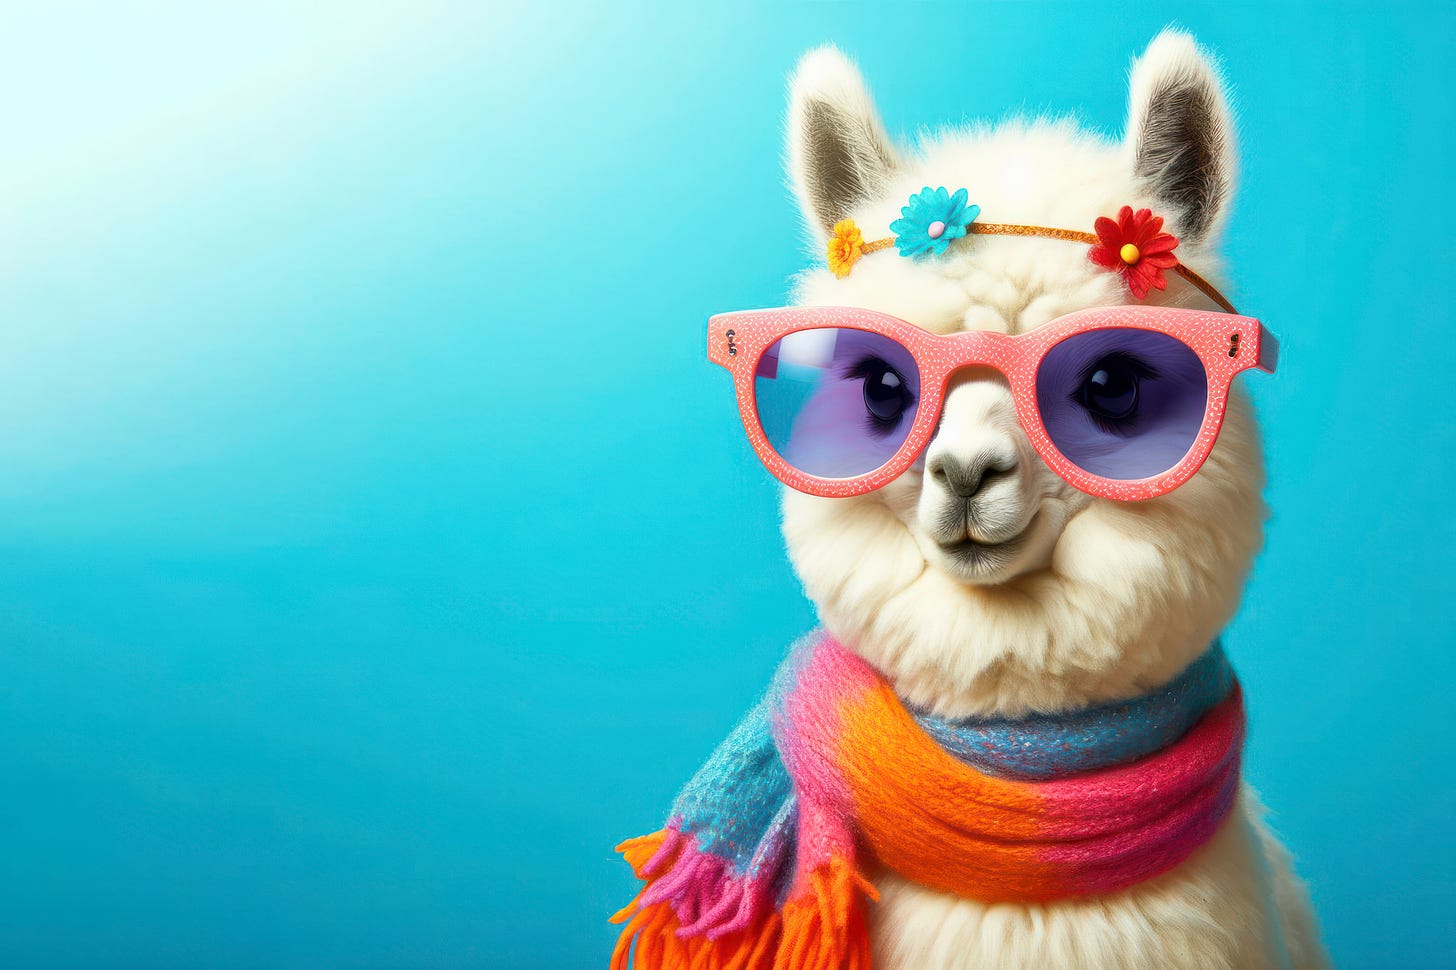 A llama or alpaca wearing pink sunglasses, a multicolored scarf, and a flower headband, posing against a bright blue background.